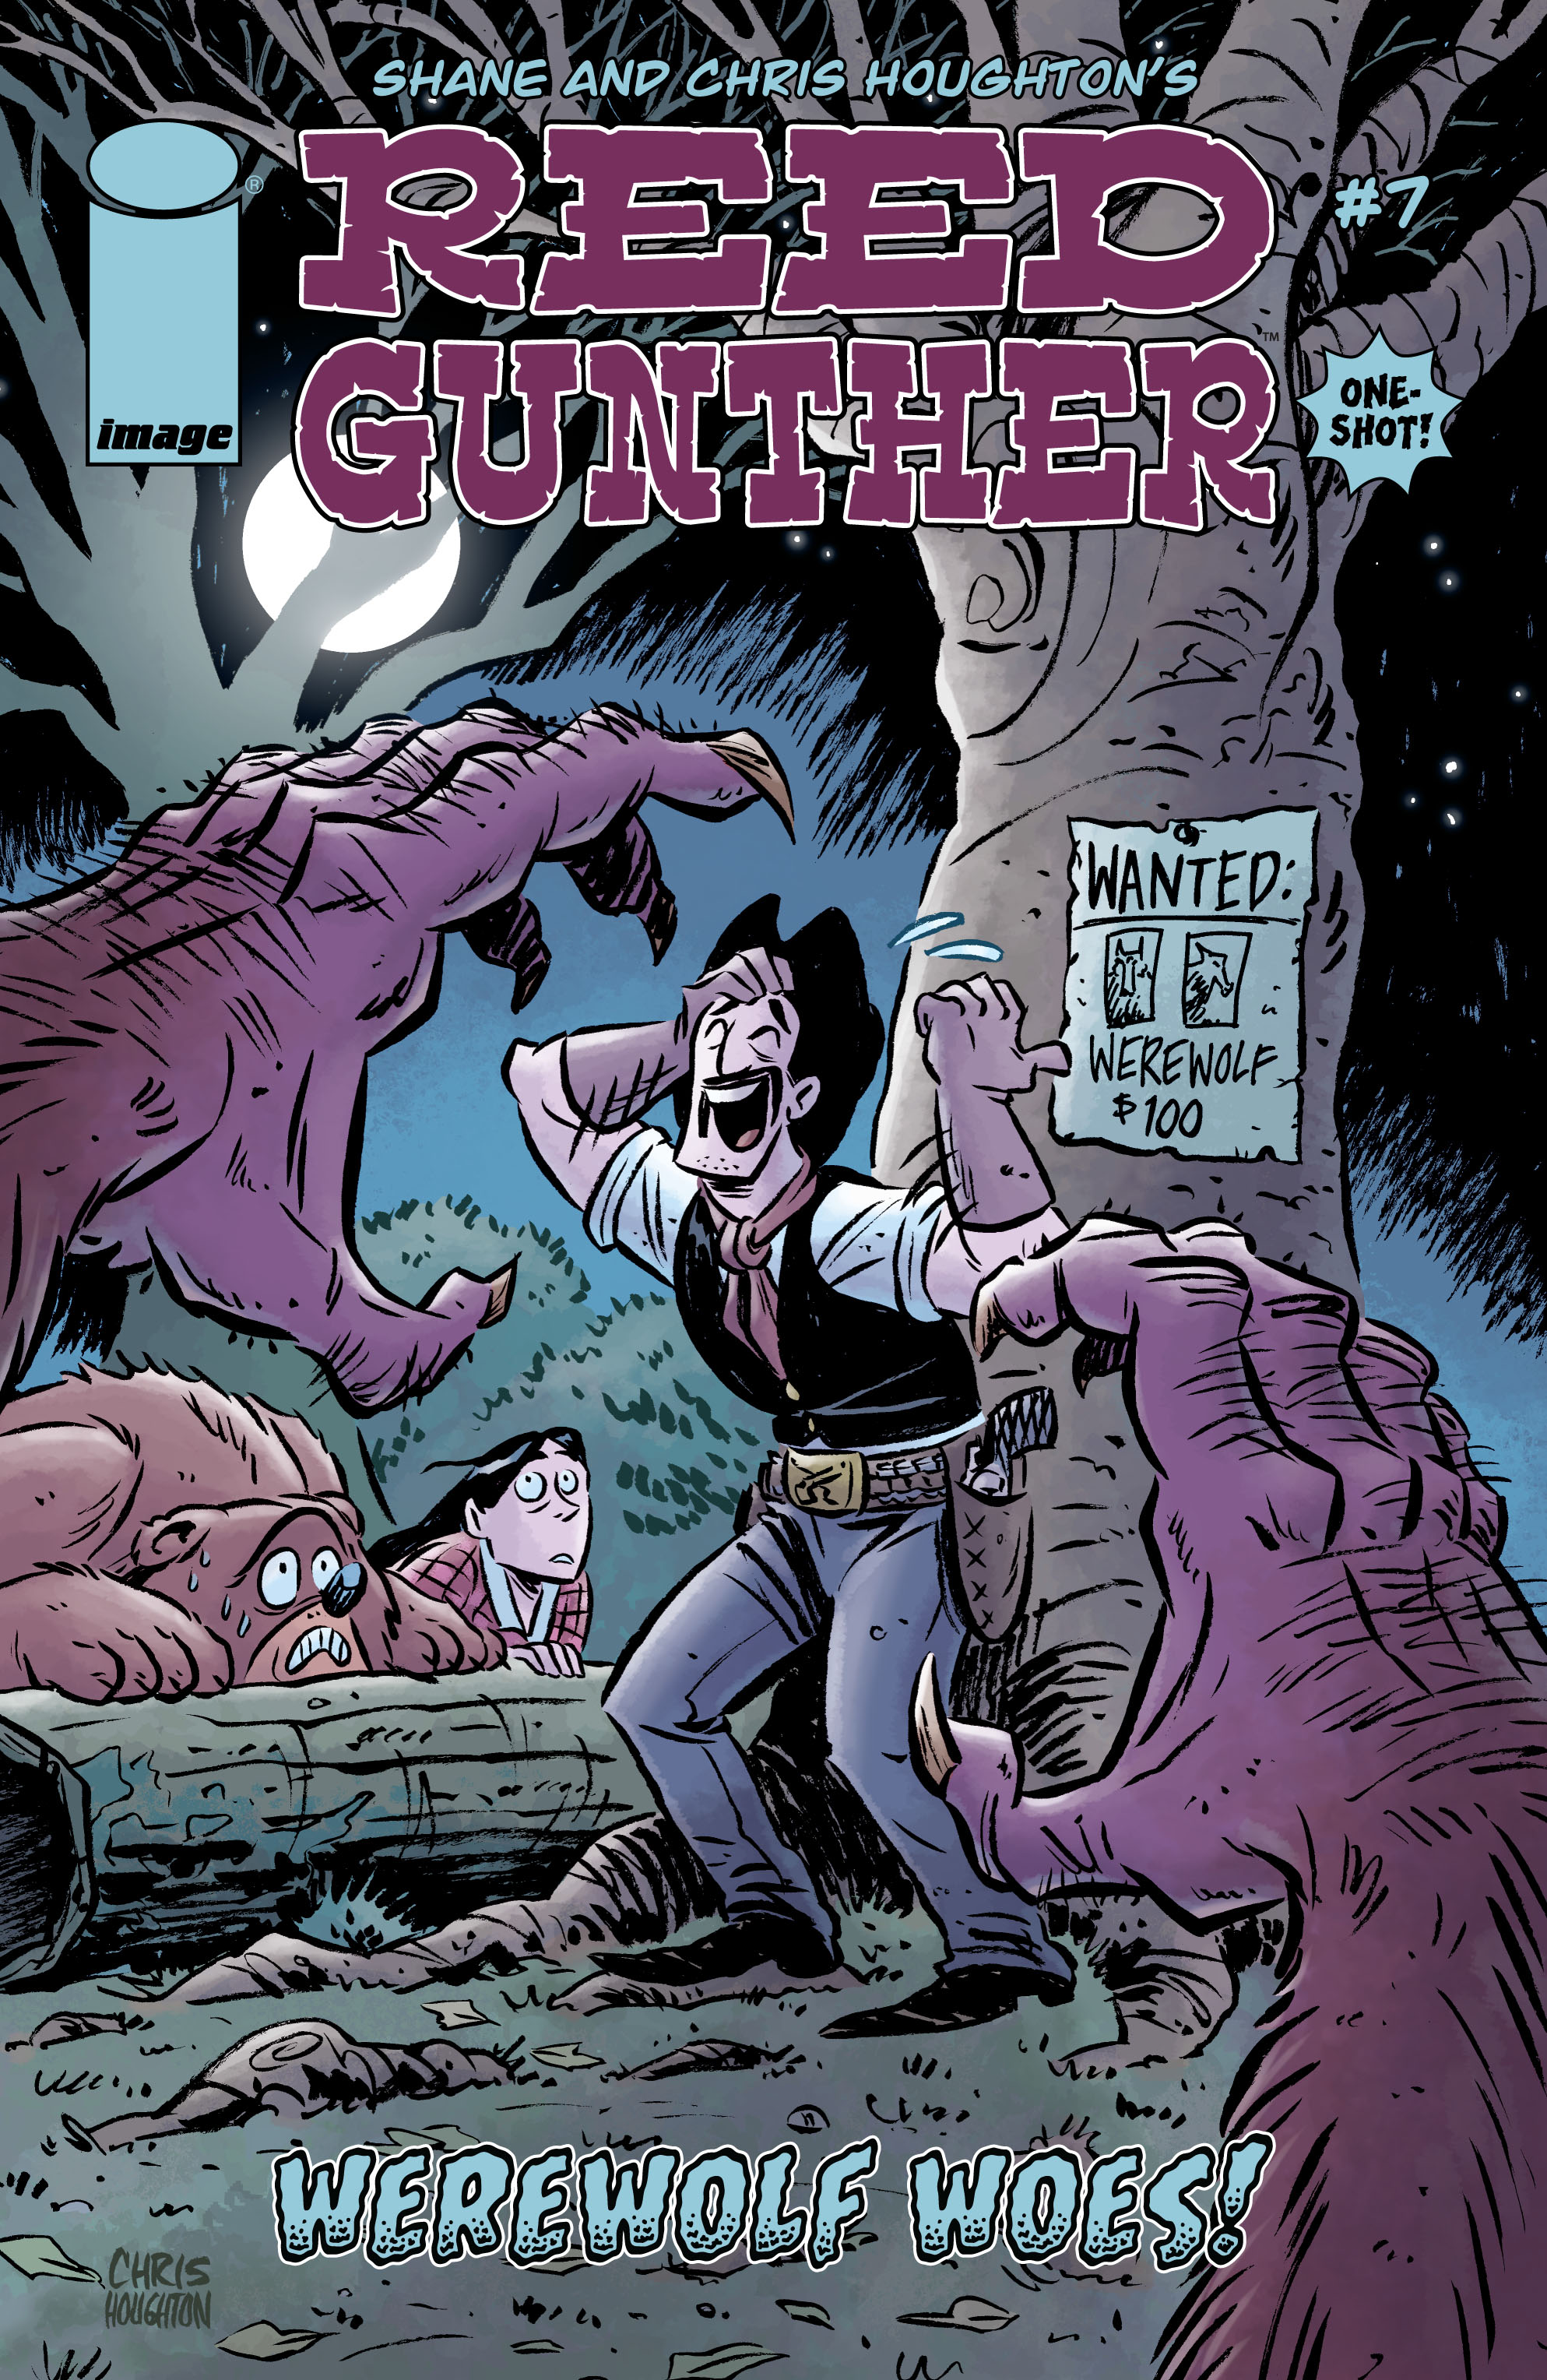 Read online Reed Gunther comic -  Issue #7 - 1